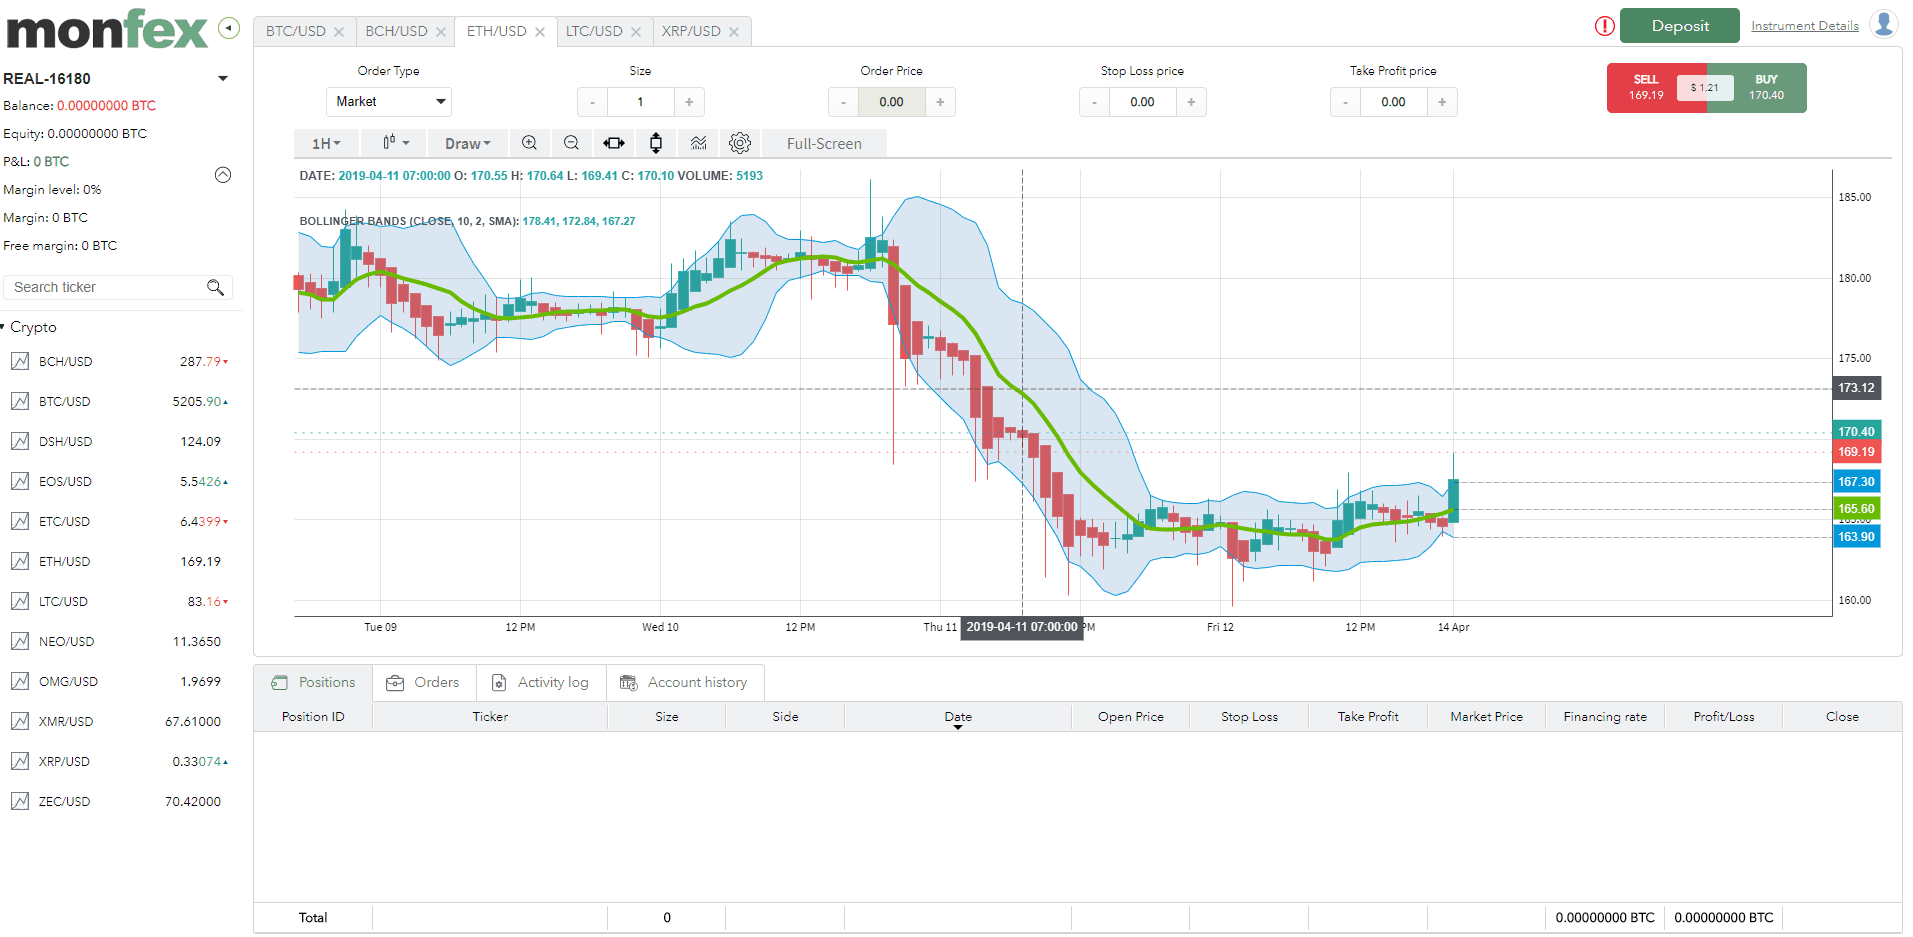 Monfex offer a sleek and simple UI which makes trading easy